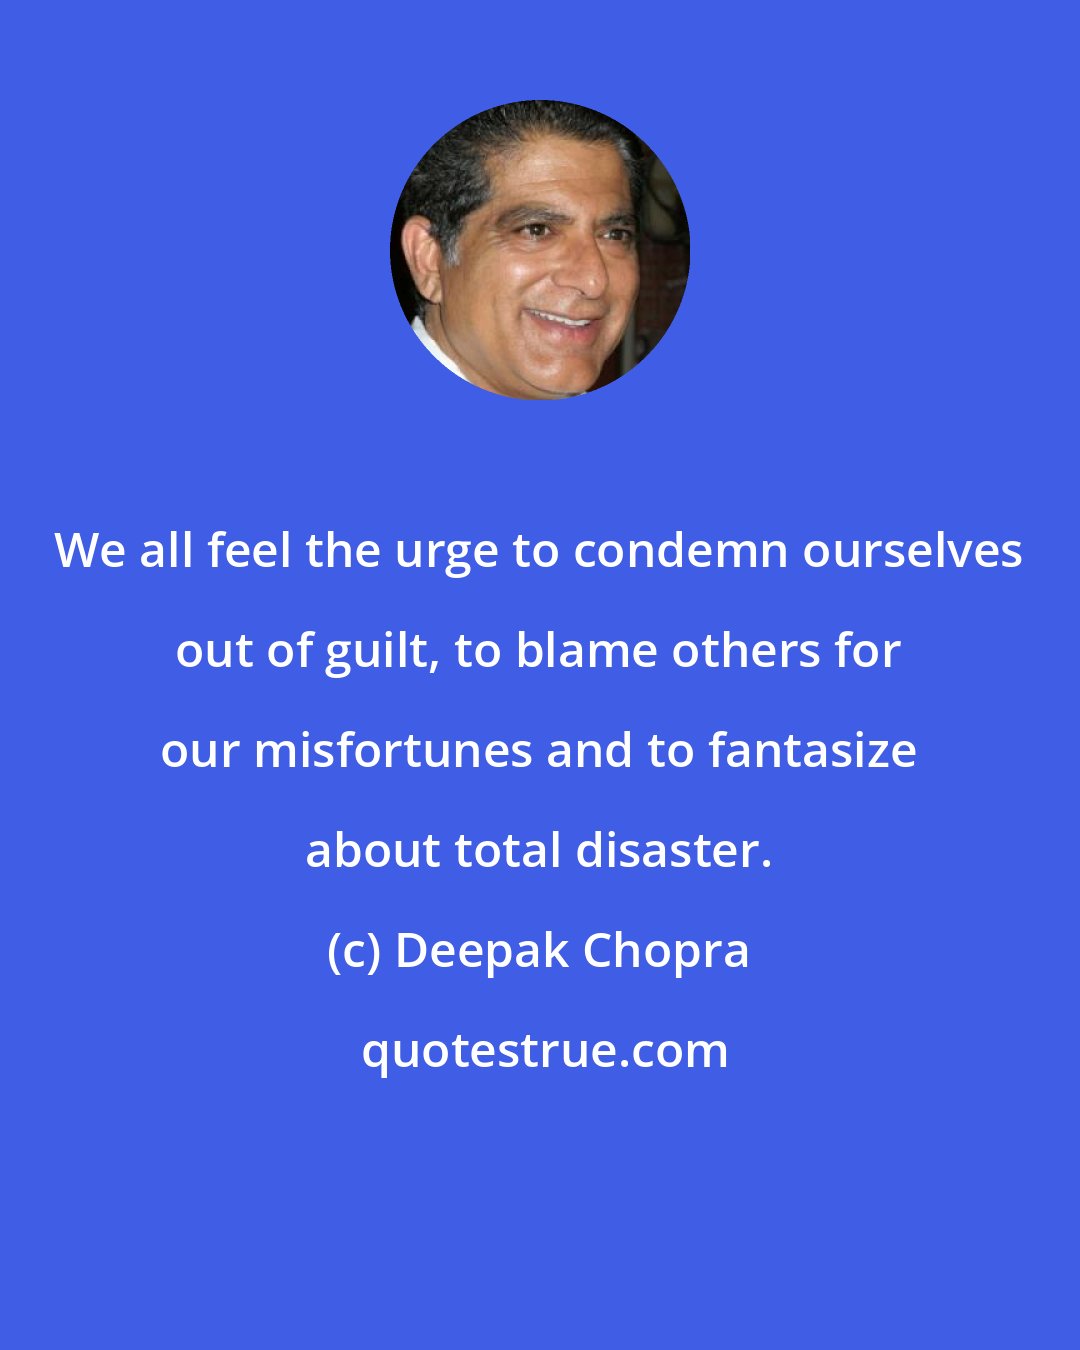 Deepak Chopra: We all feel the urge to condemn ourselves out of guilt, to blame others for our misfortunes and to fantasize about total disaster.